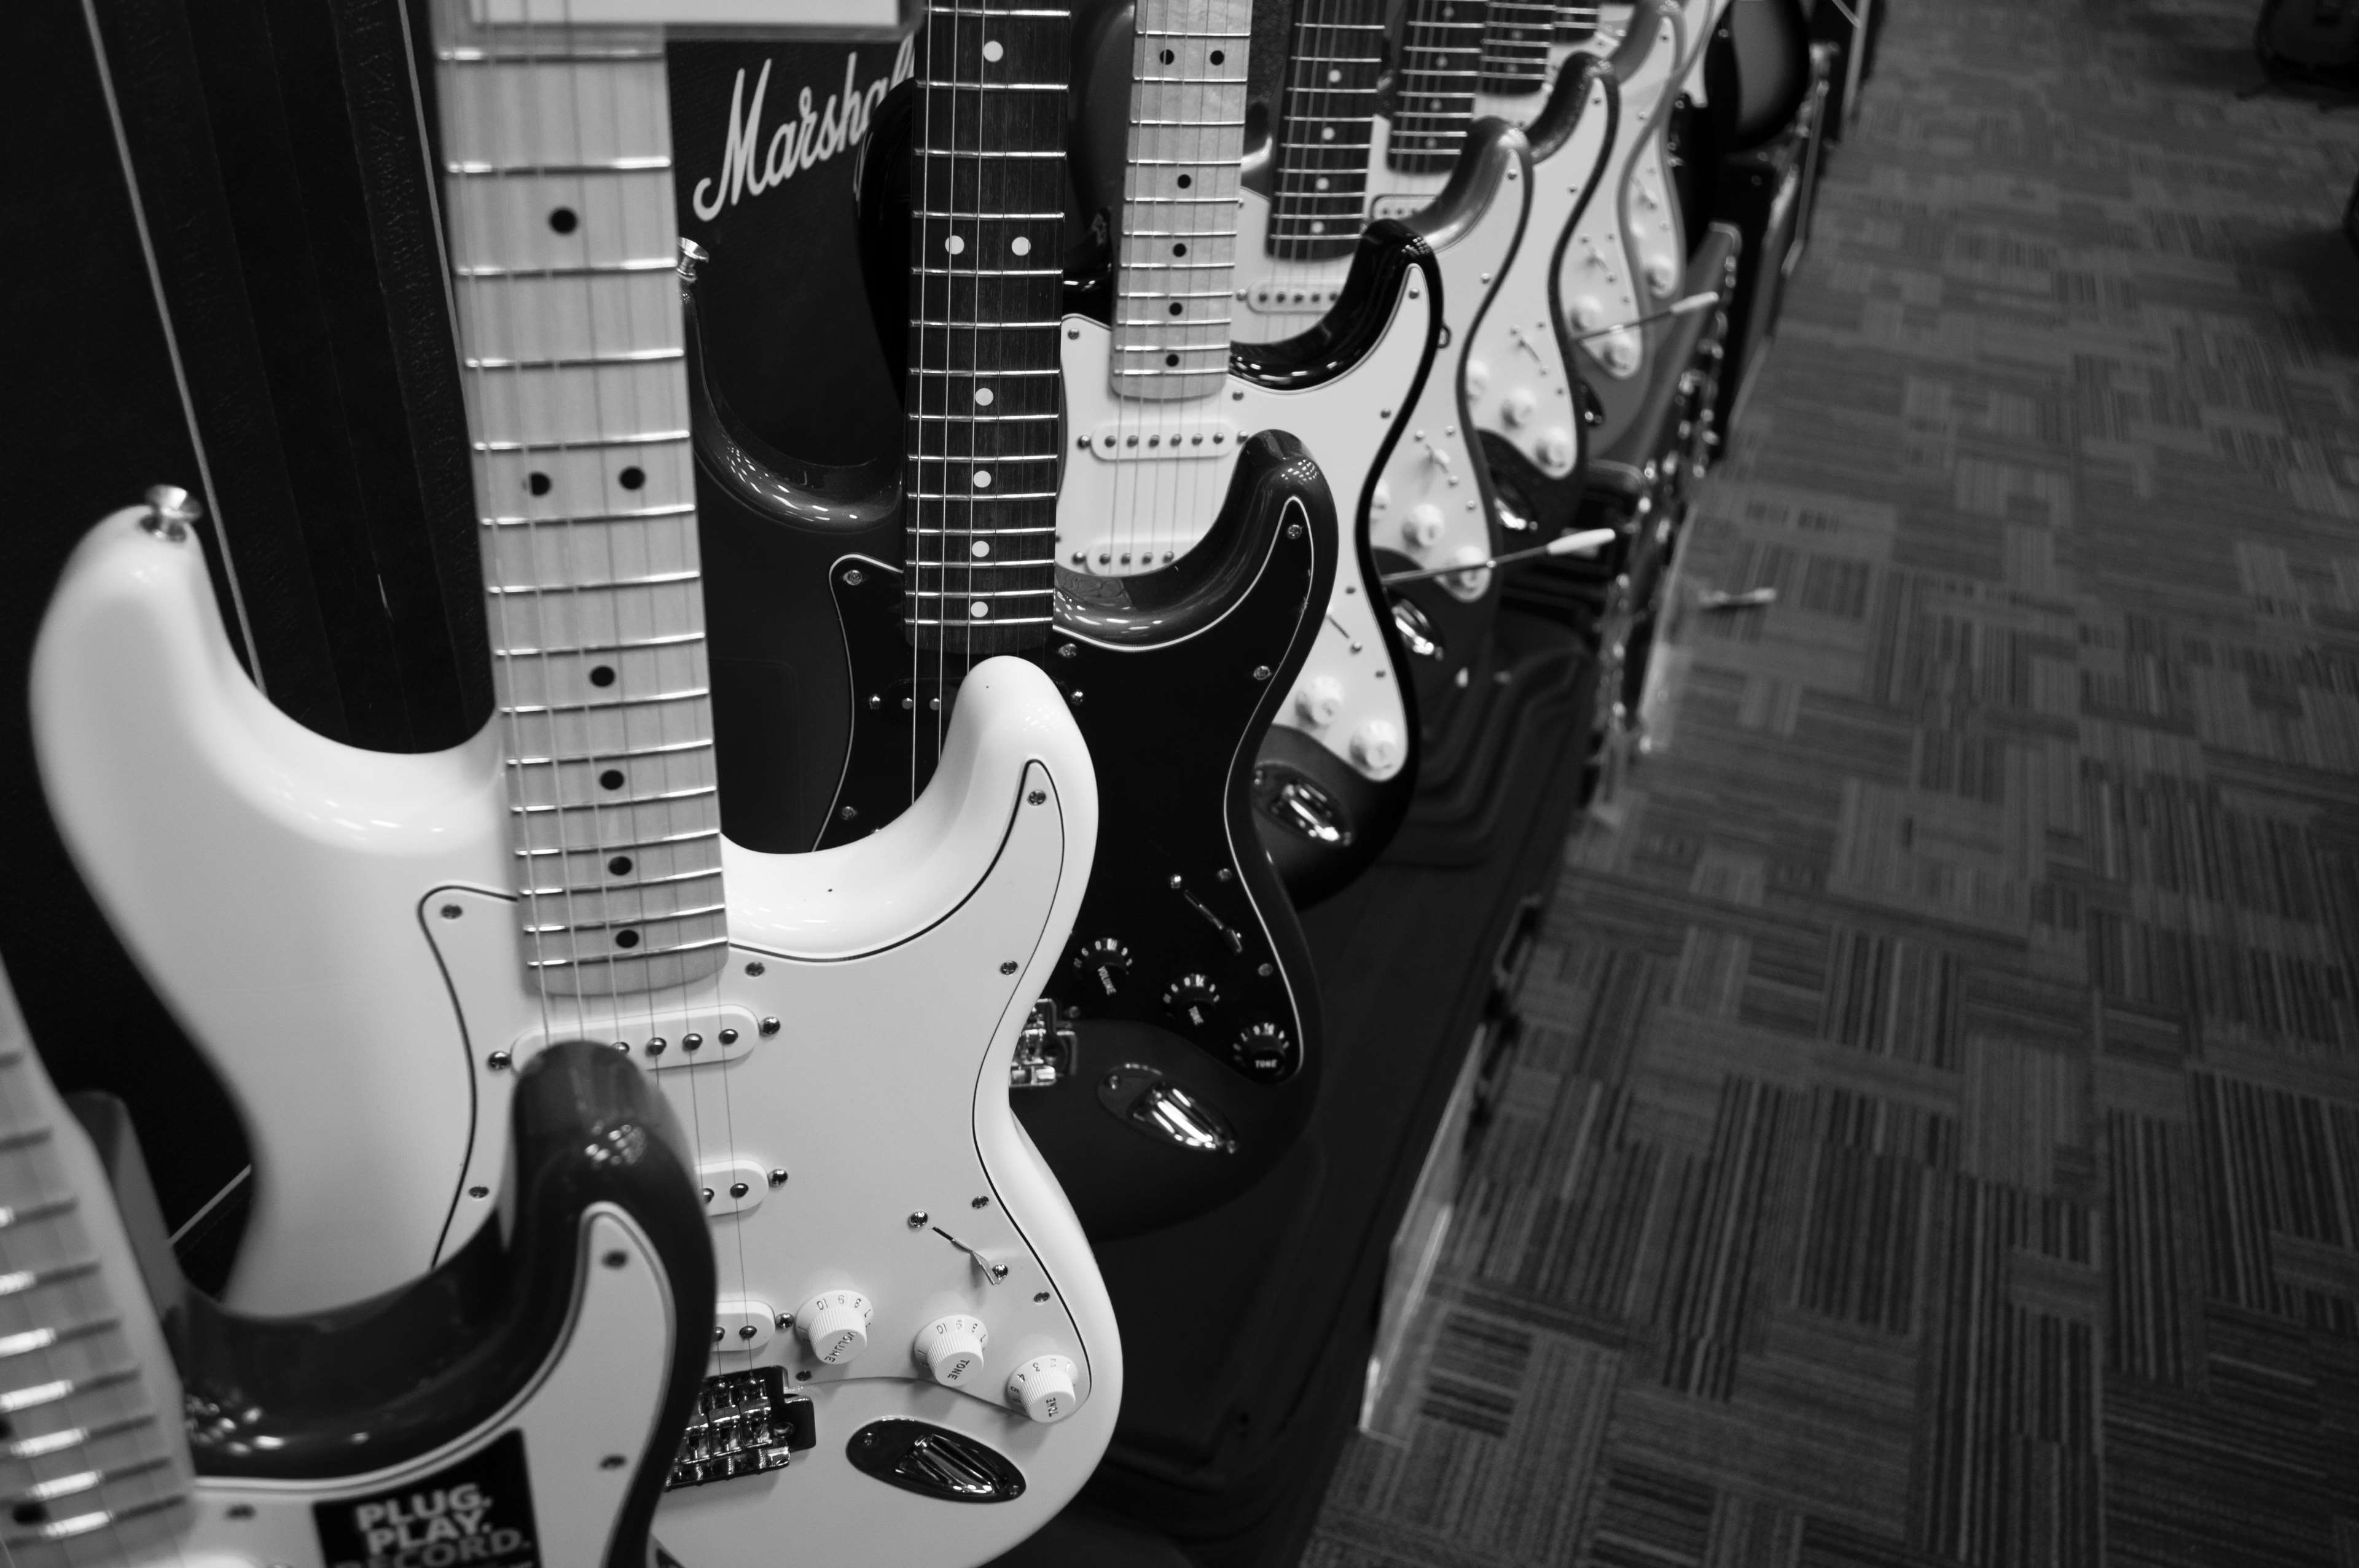 Guitars p k k hd wallpapers backgrounds free download rare gallery